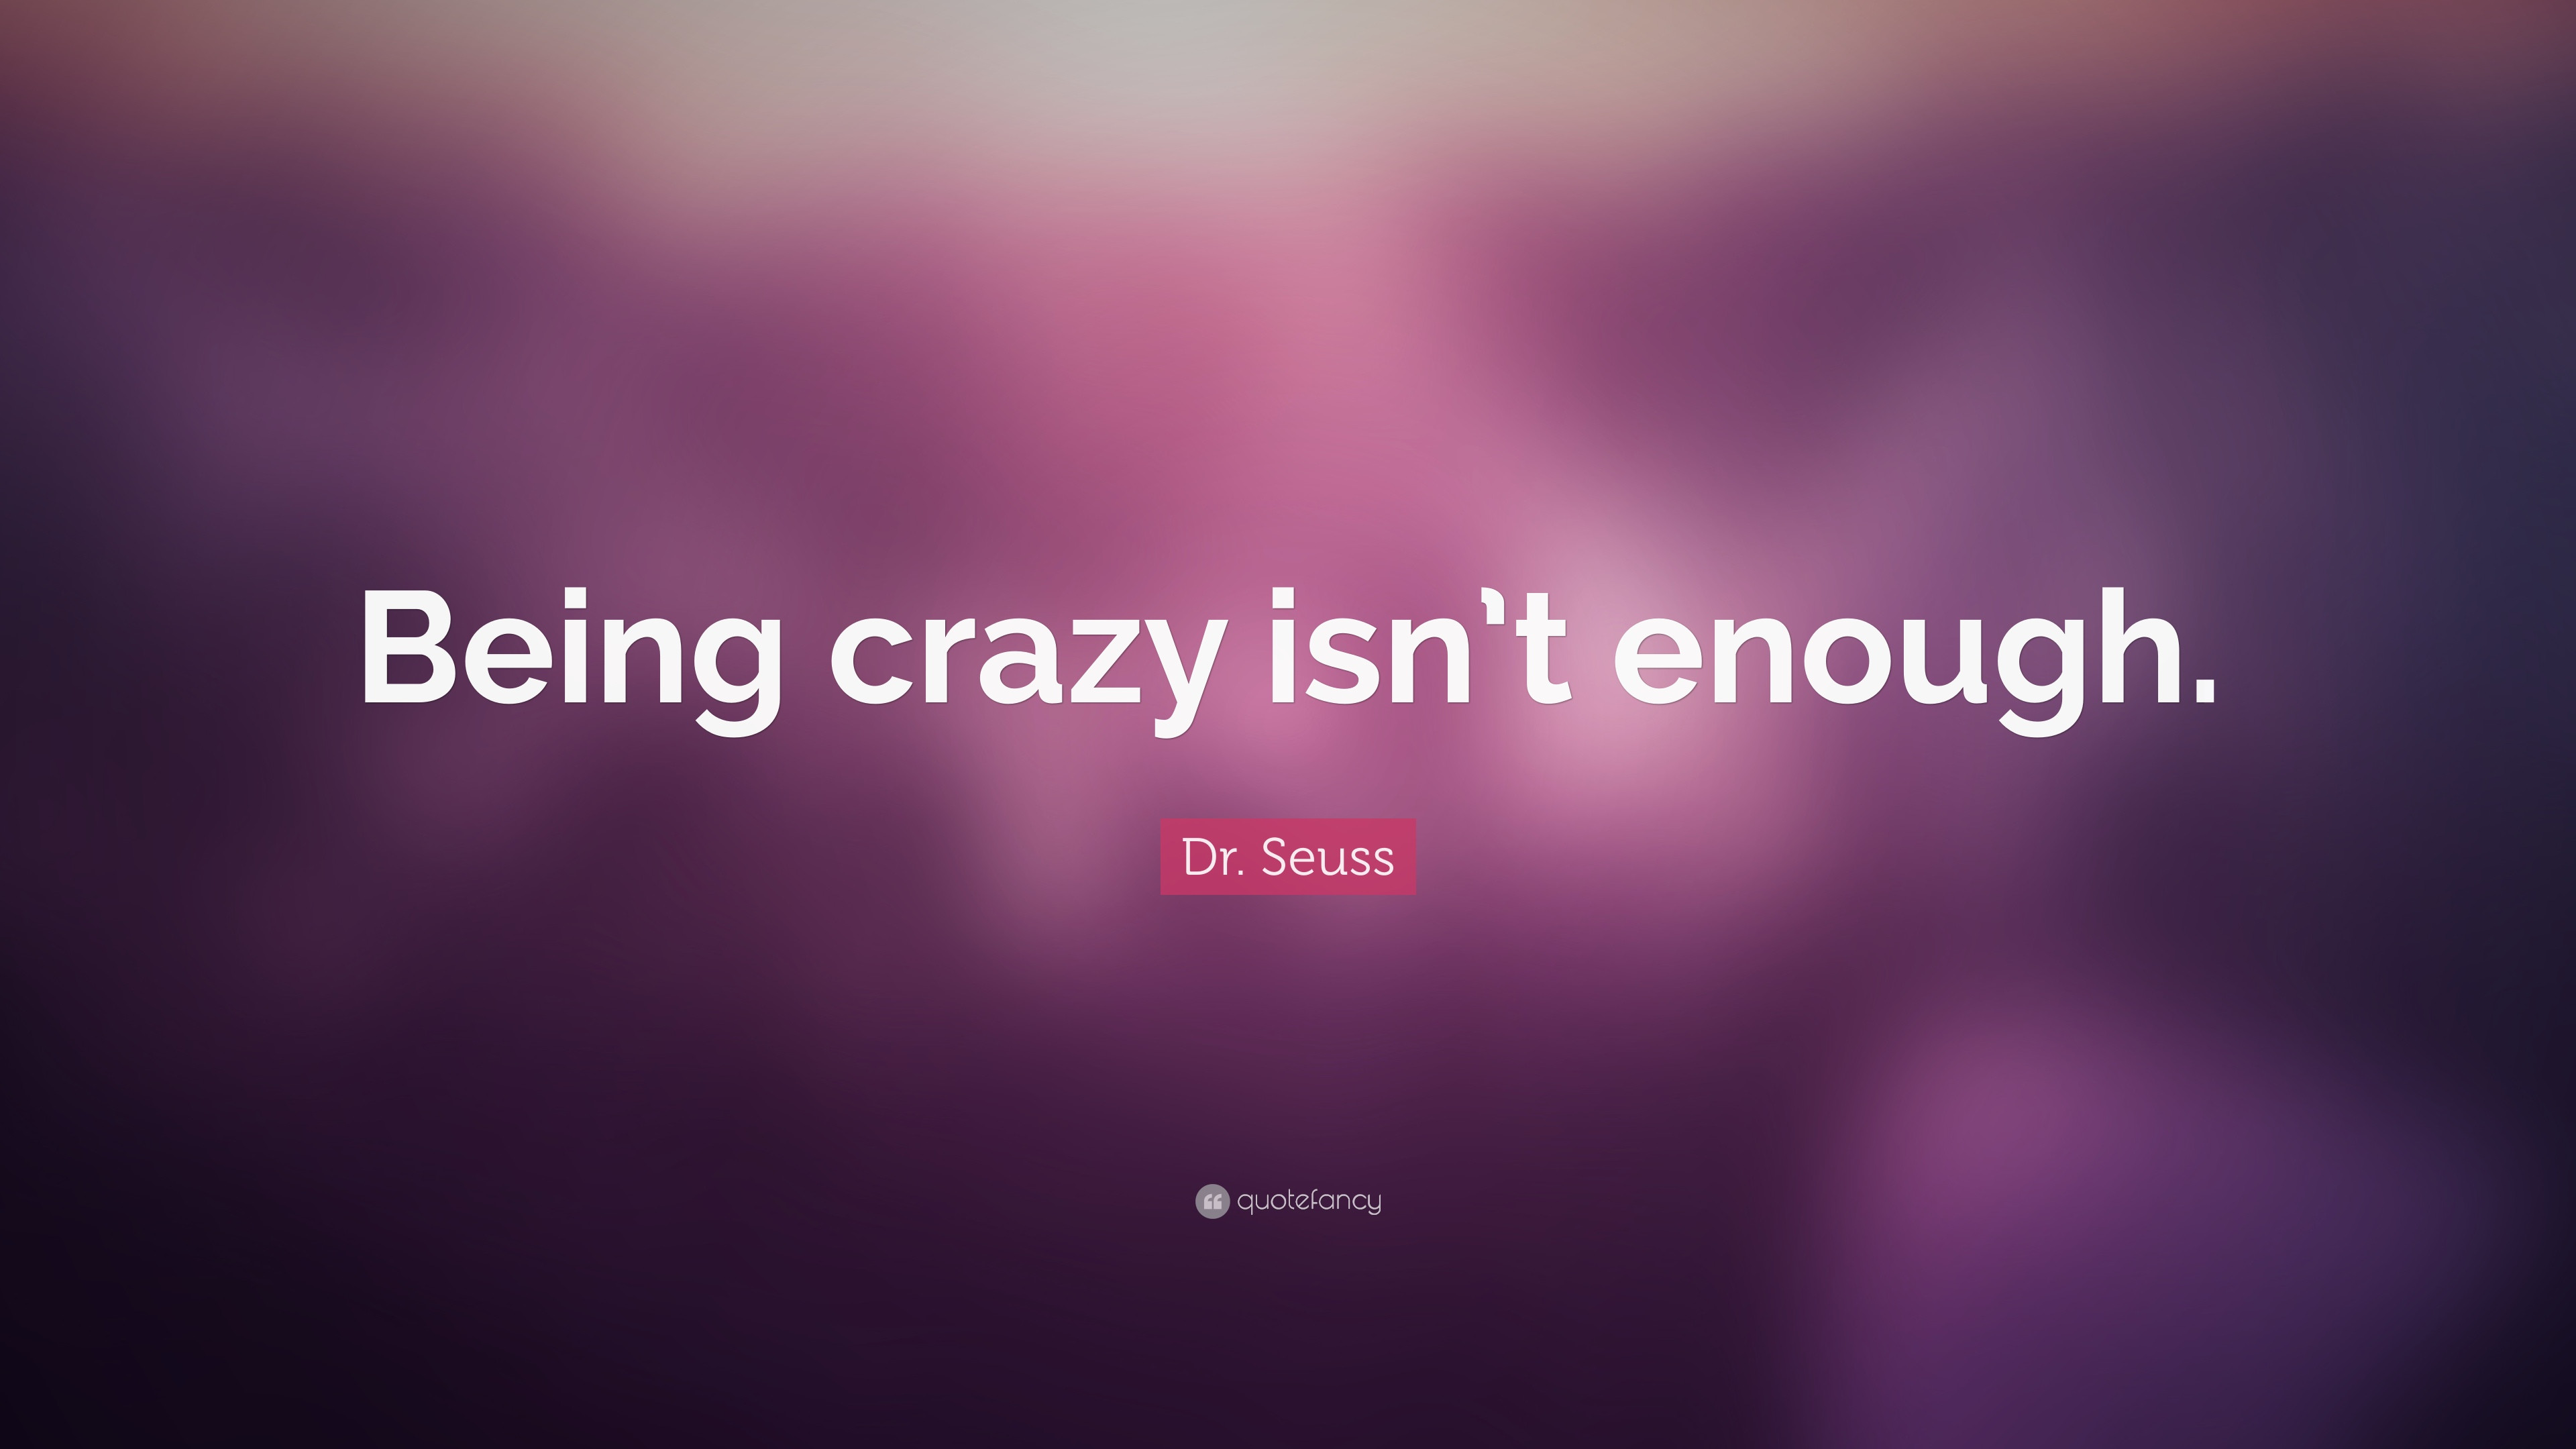 3840x2160 Wallpaper With Quote Crazy Dr. Seuss Quote “Being Crazy Isn't Enough.